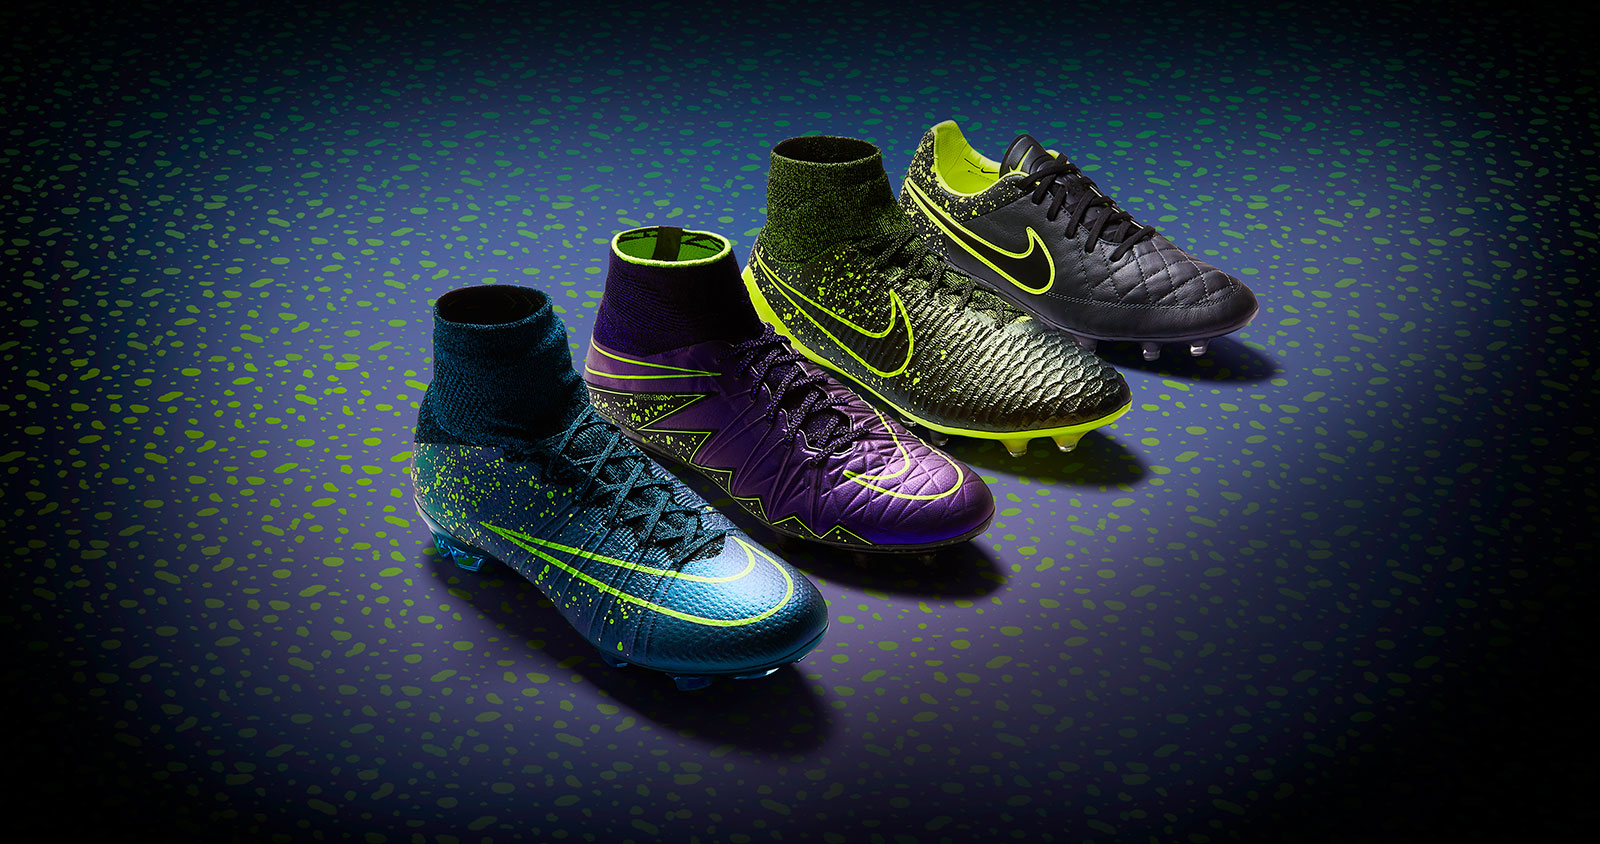 Soccer Nike Electro Boots Wallpaper In